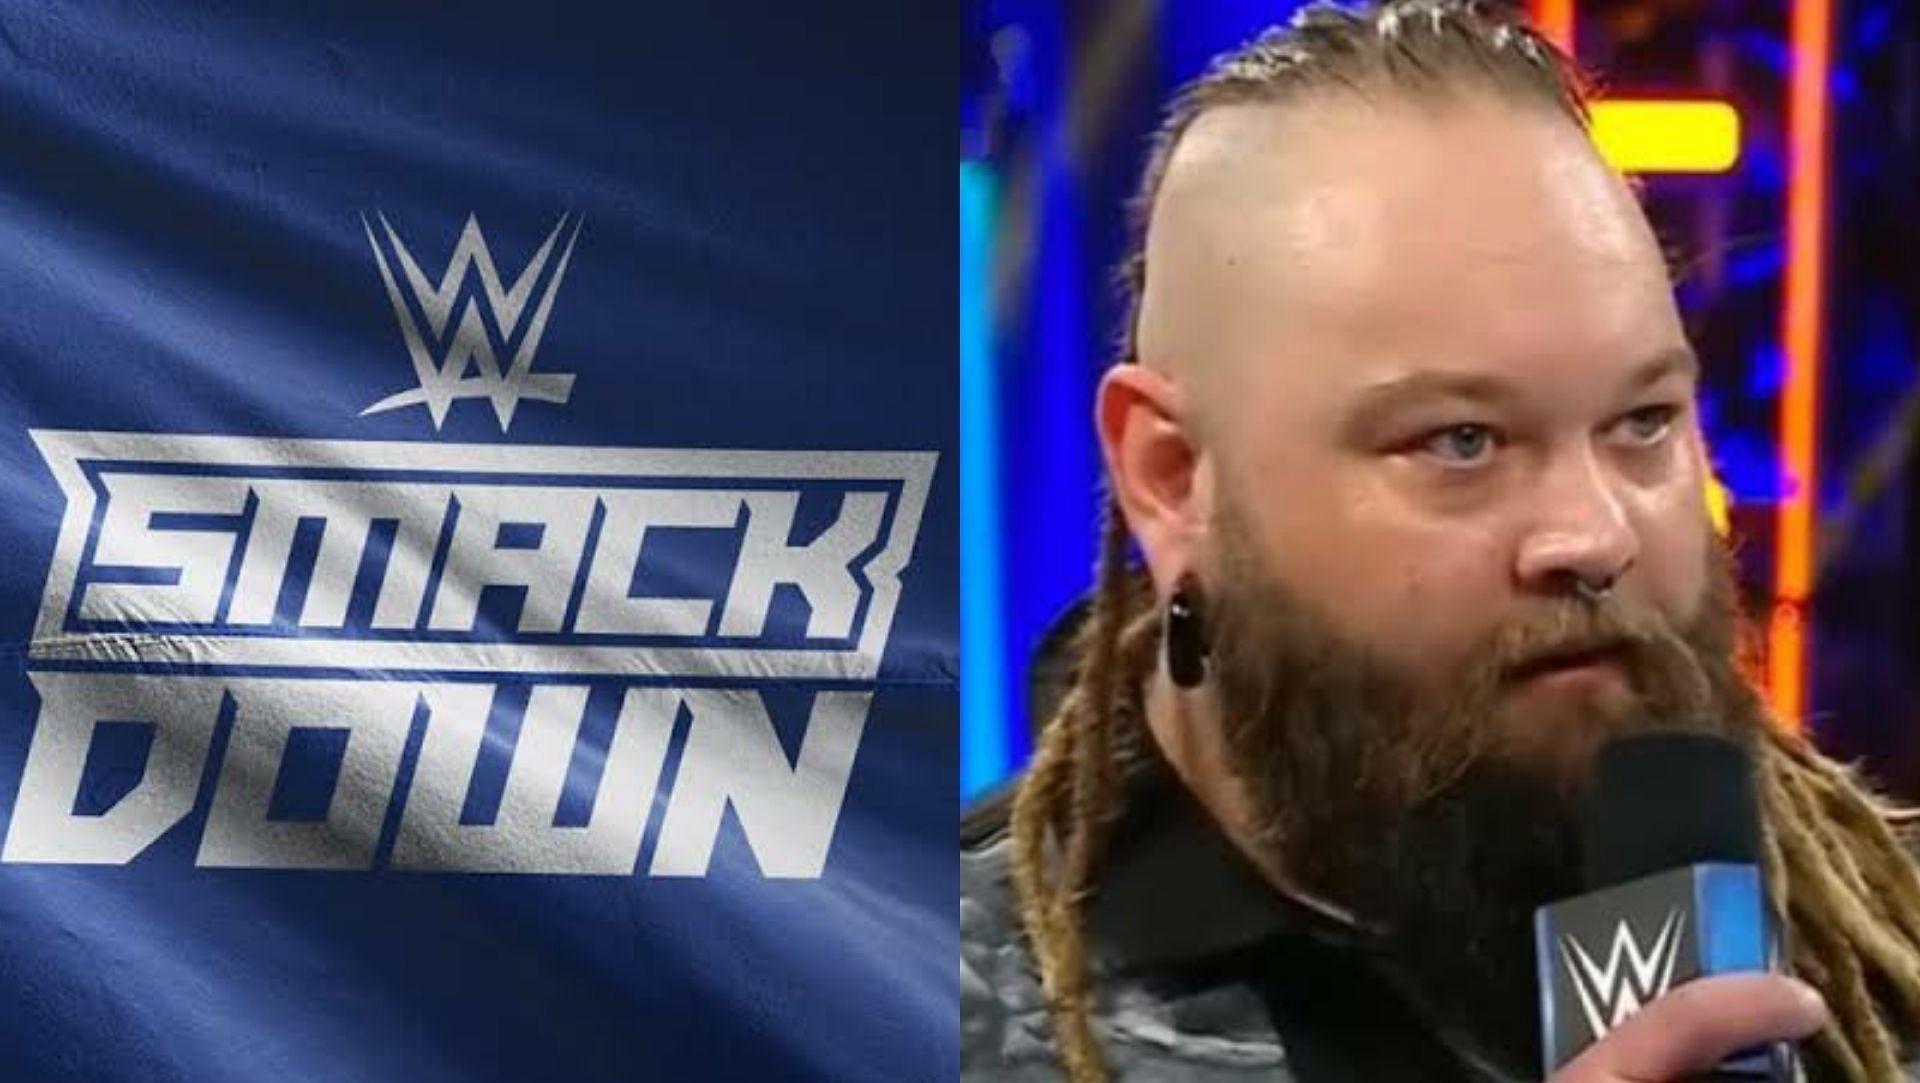 WWE SmackDown Preview Is Bray Wyatt returning tonight? Plans revealed